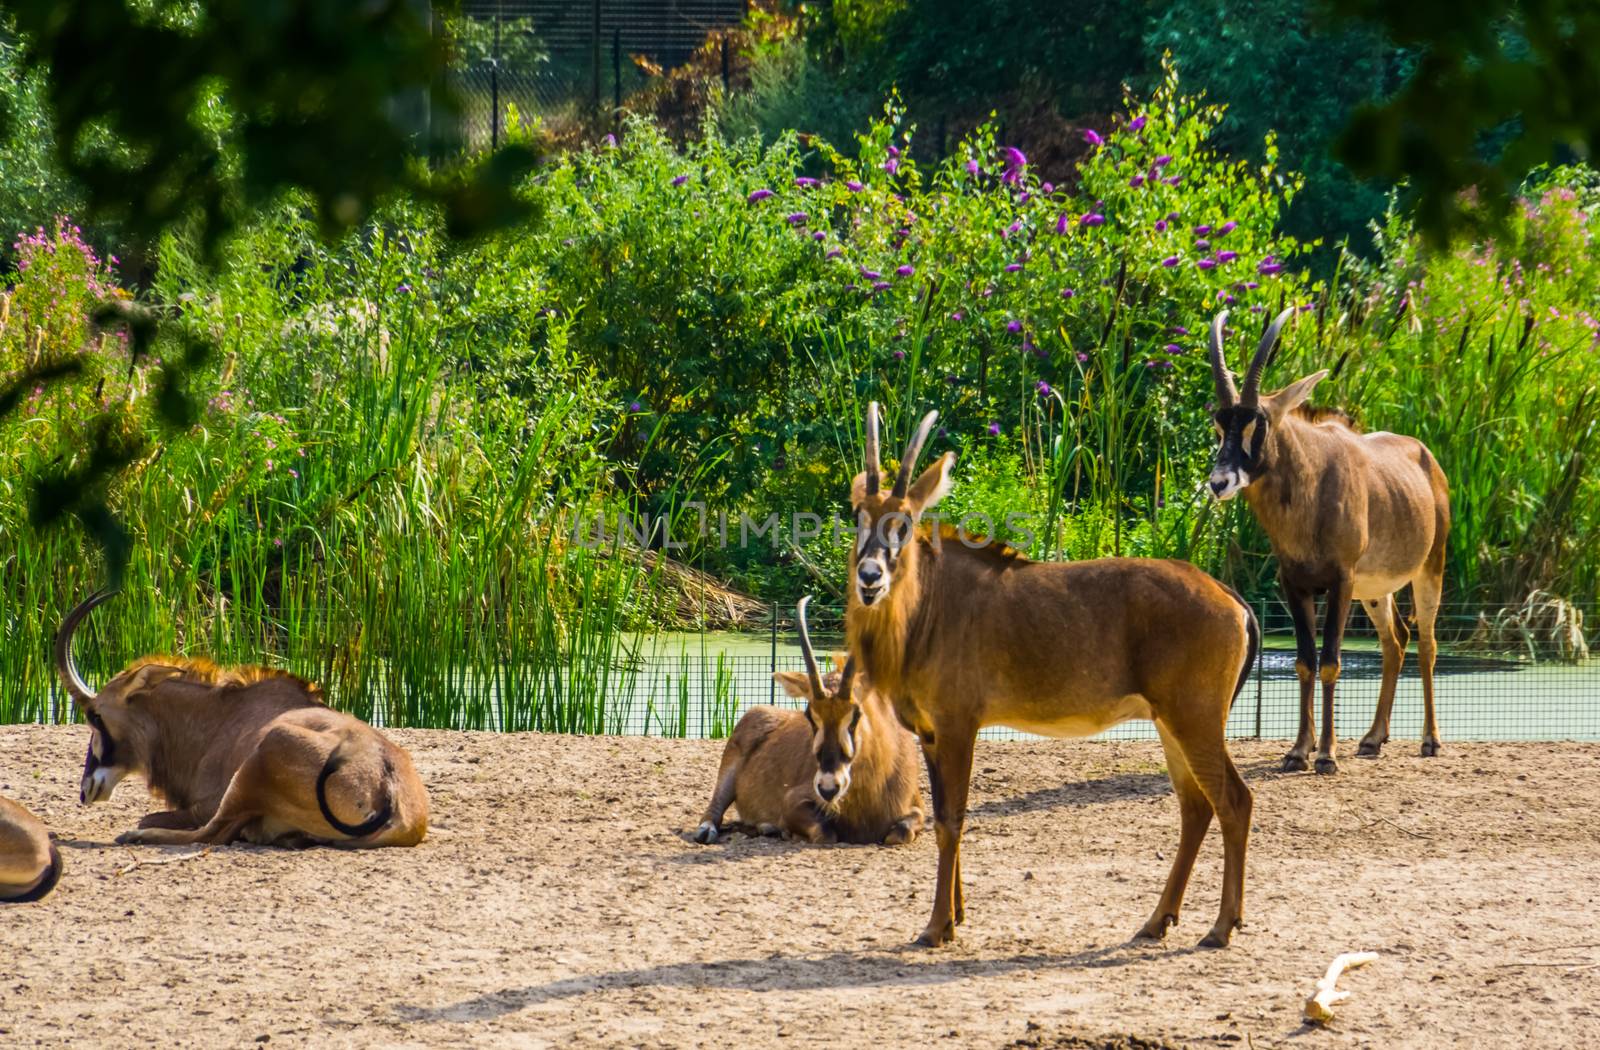 roan antelope herd together, tropical animal specie from the savanna of africa by charlottebleijenberg